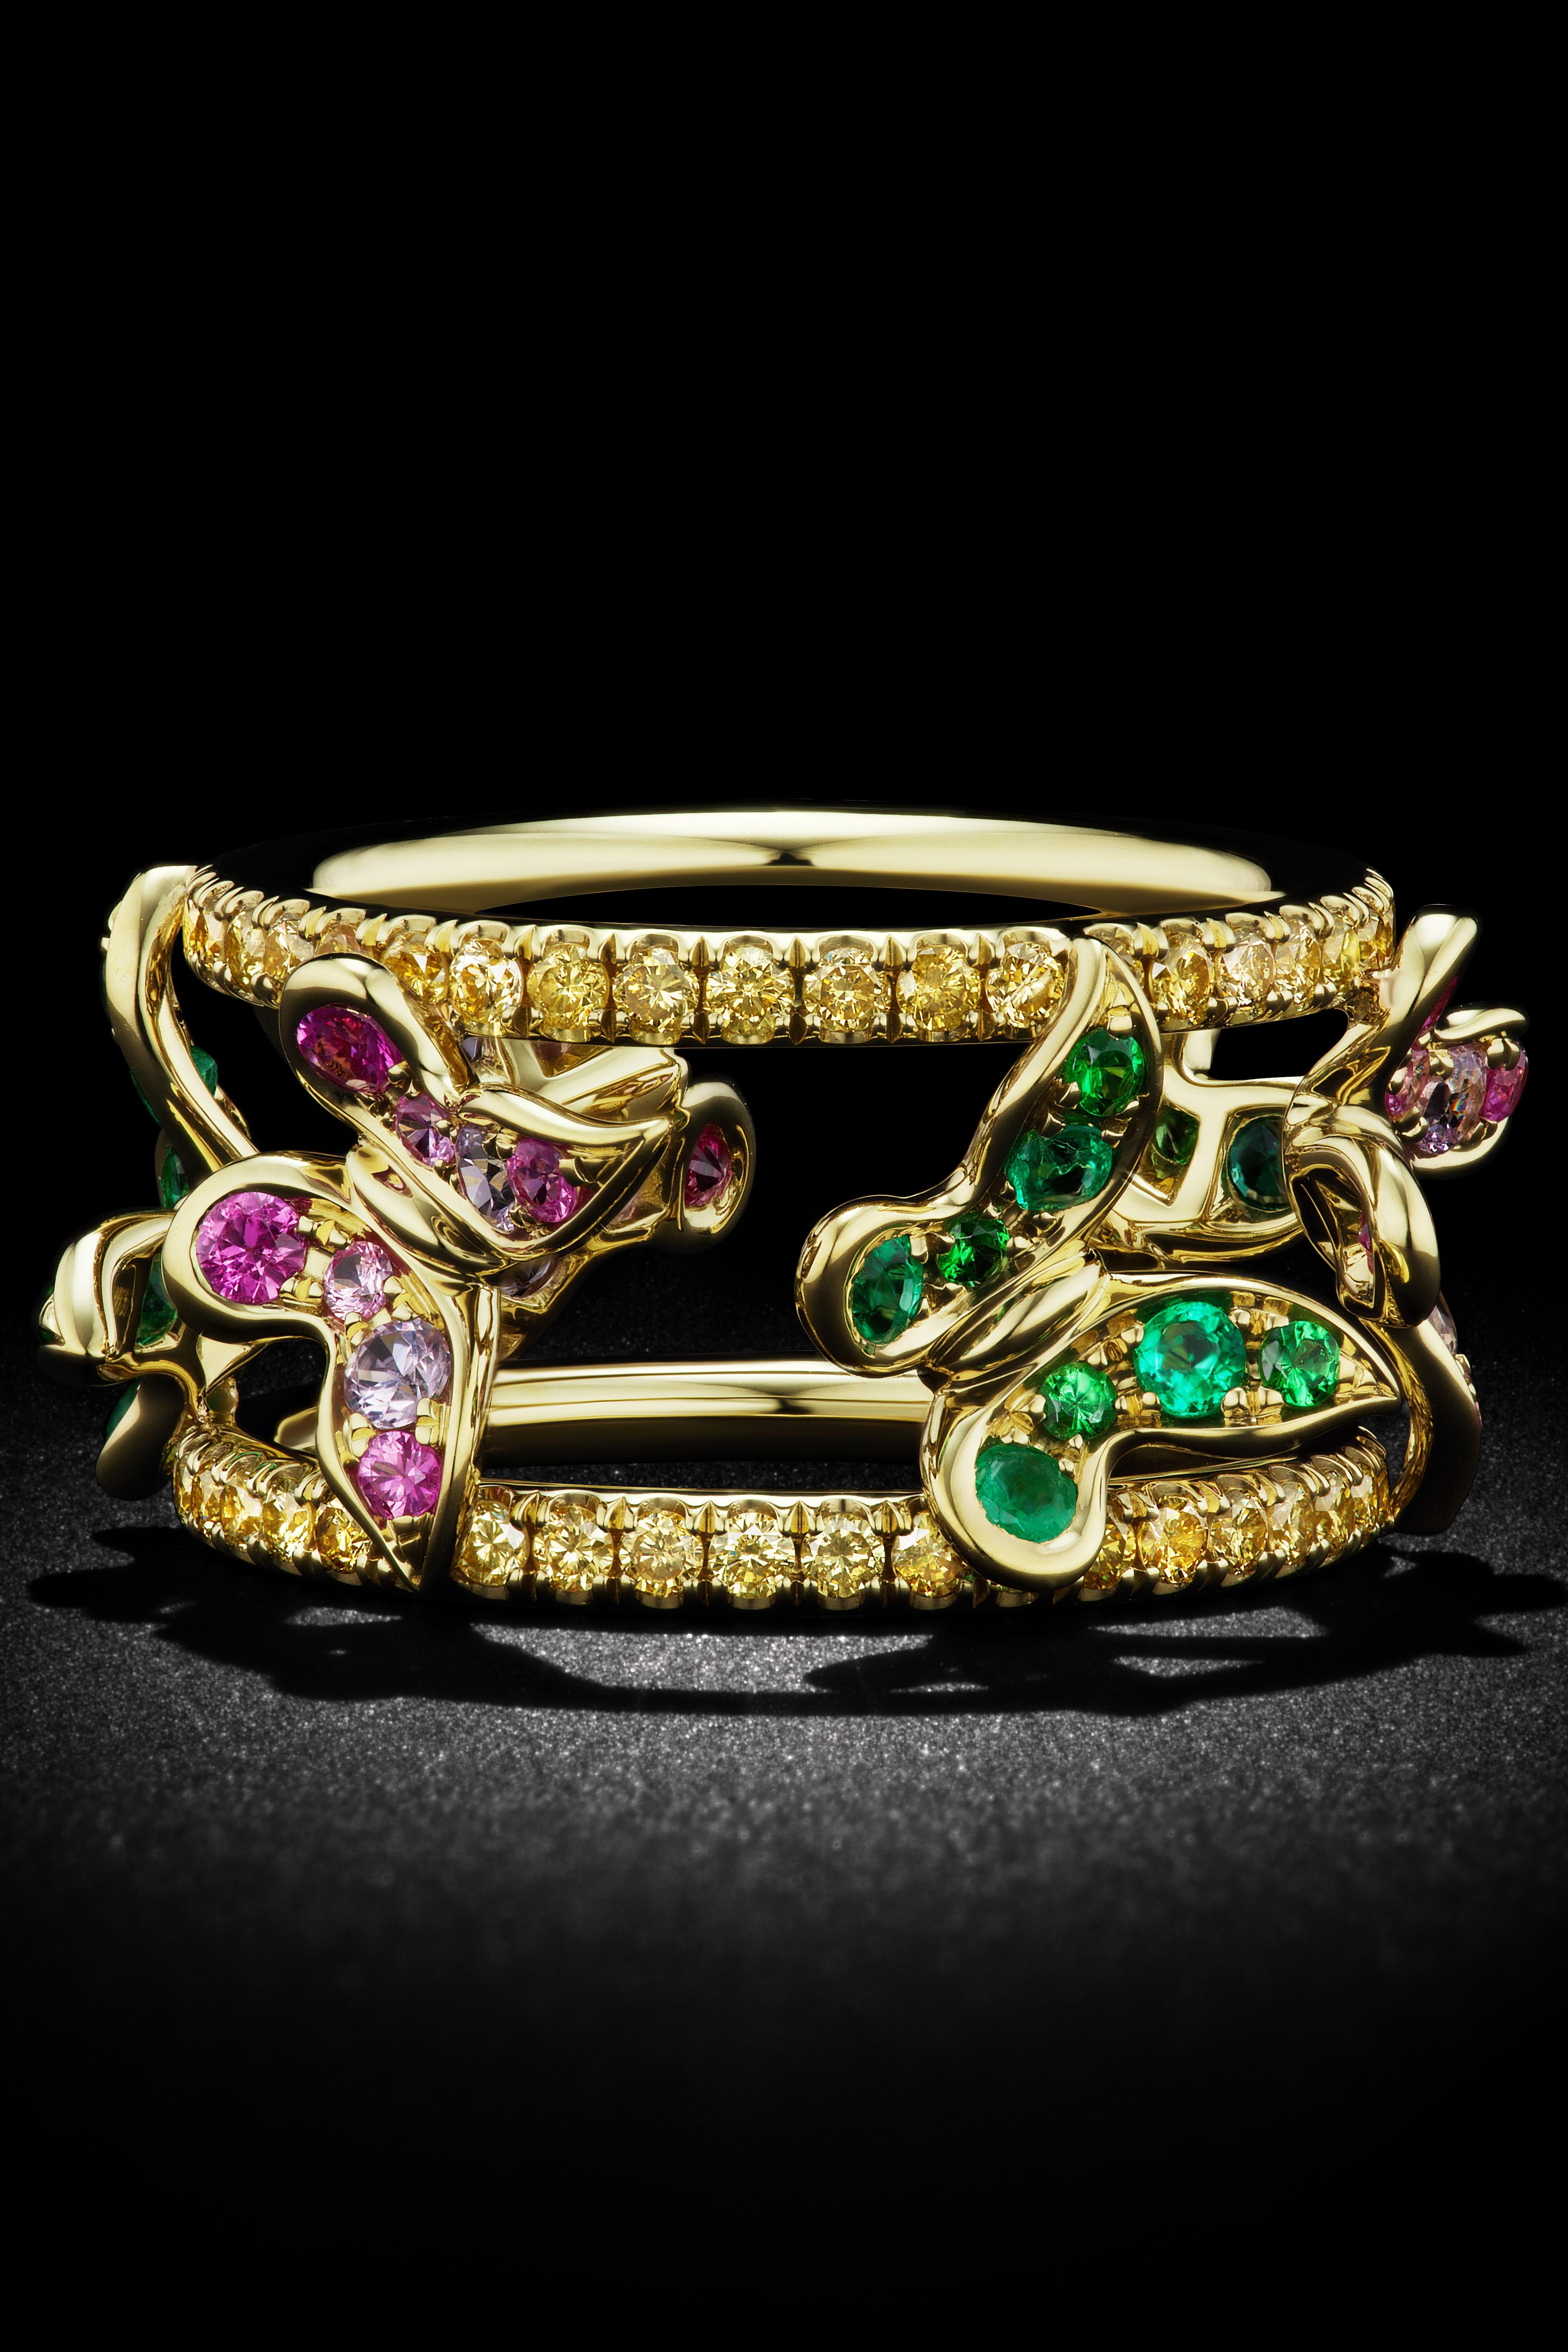 Set in 18K Yellow Gold this open frame band has butterflies comprised of Green Tsavortie, Green emeralds, Purple and Pink Sapphires with 82 yellow diamonds. 
